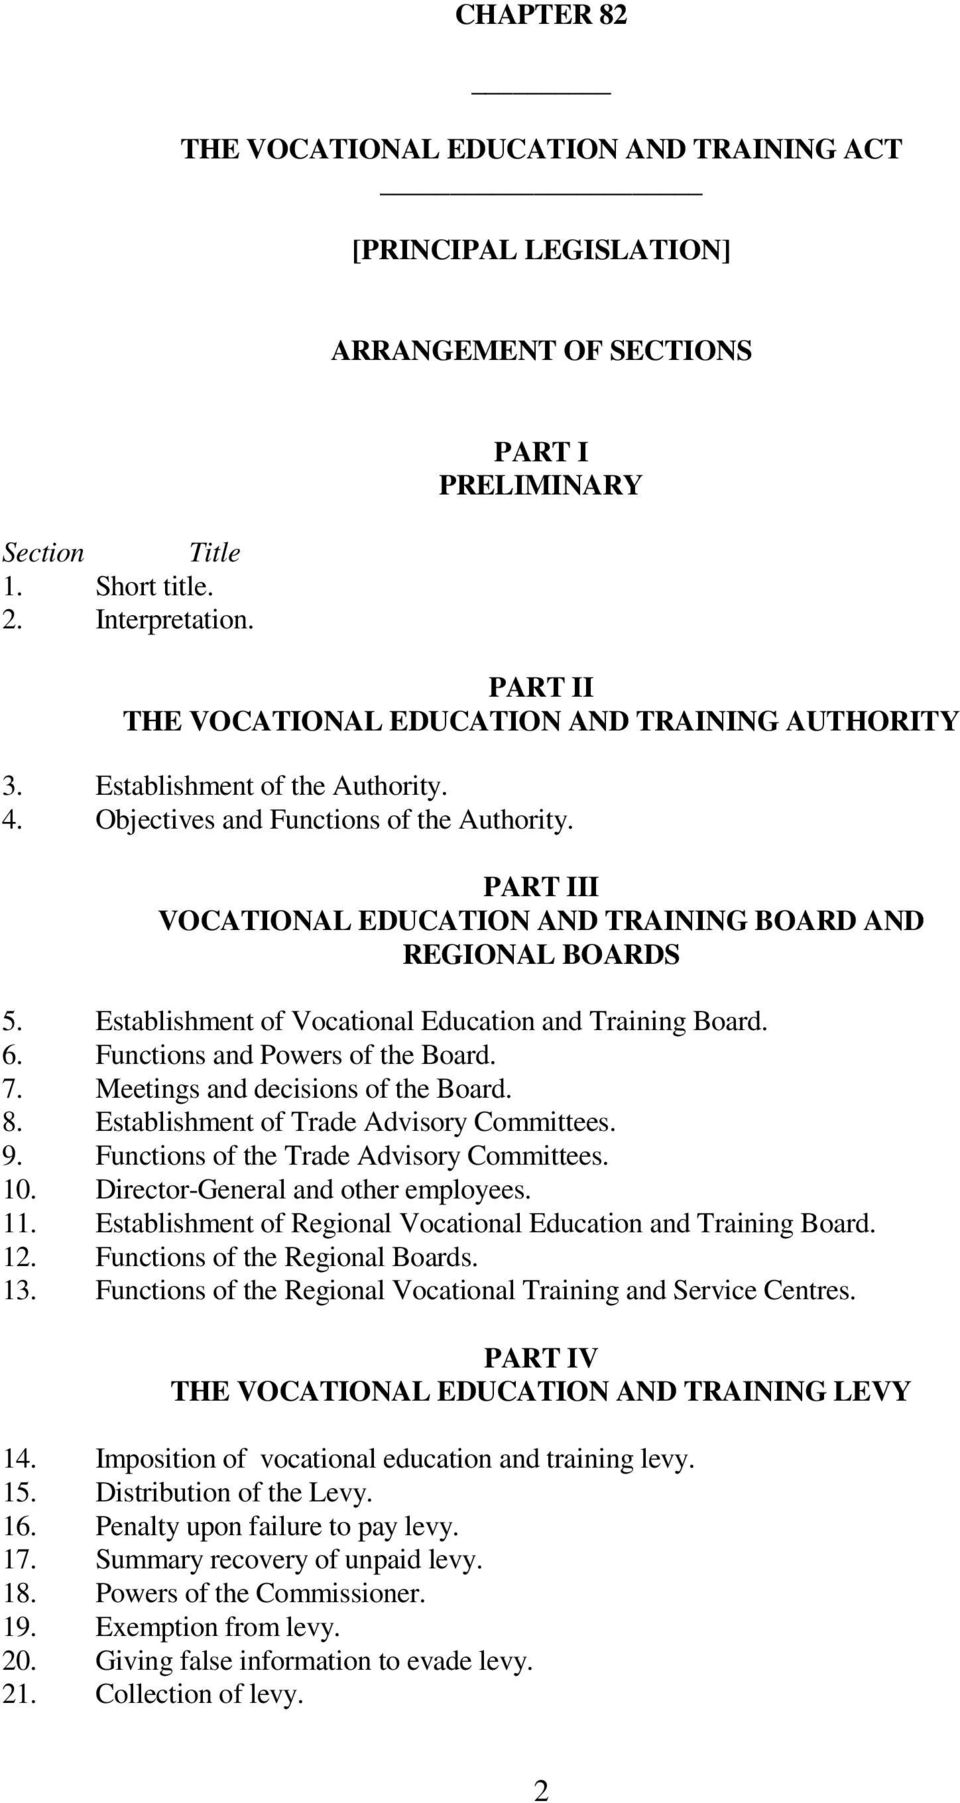 PART III VOCATIONAL EDUCATION AND TRAINING BOARD AND REGIONAL BOARDS 5. Establishment of Vocational Education and Training Board. 6. Functions and Powers of the Board. 7.